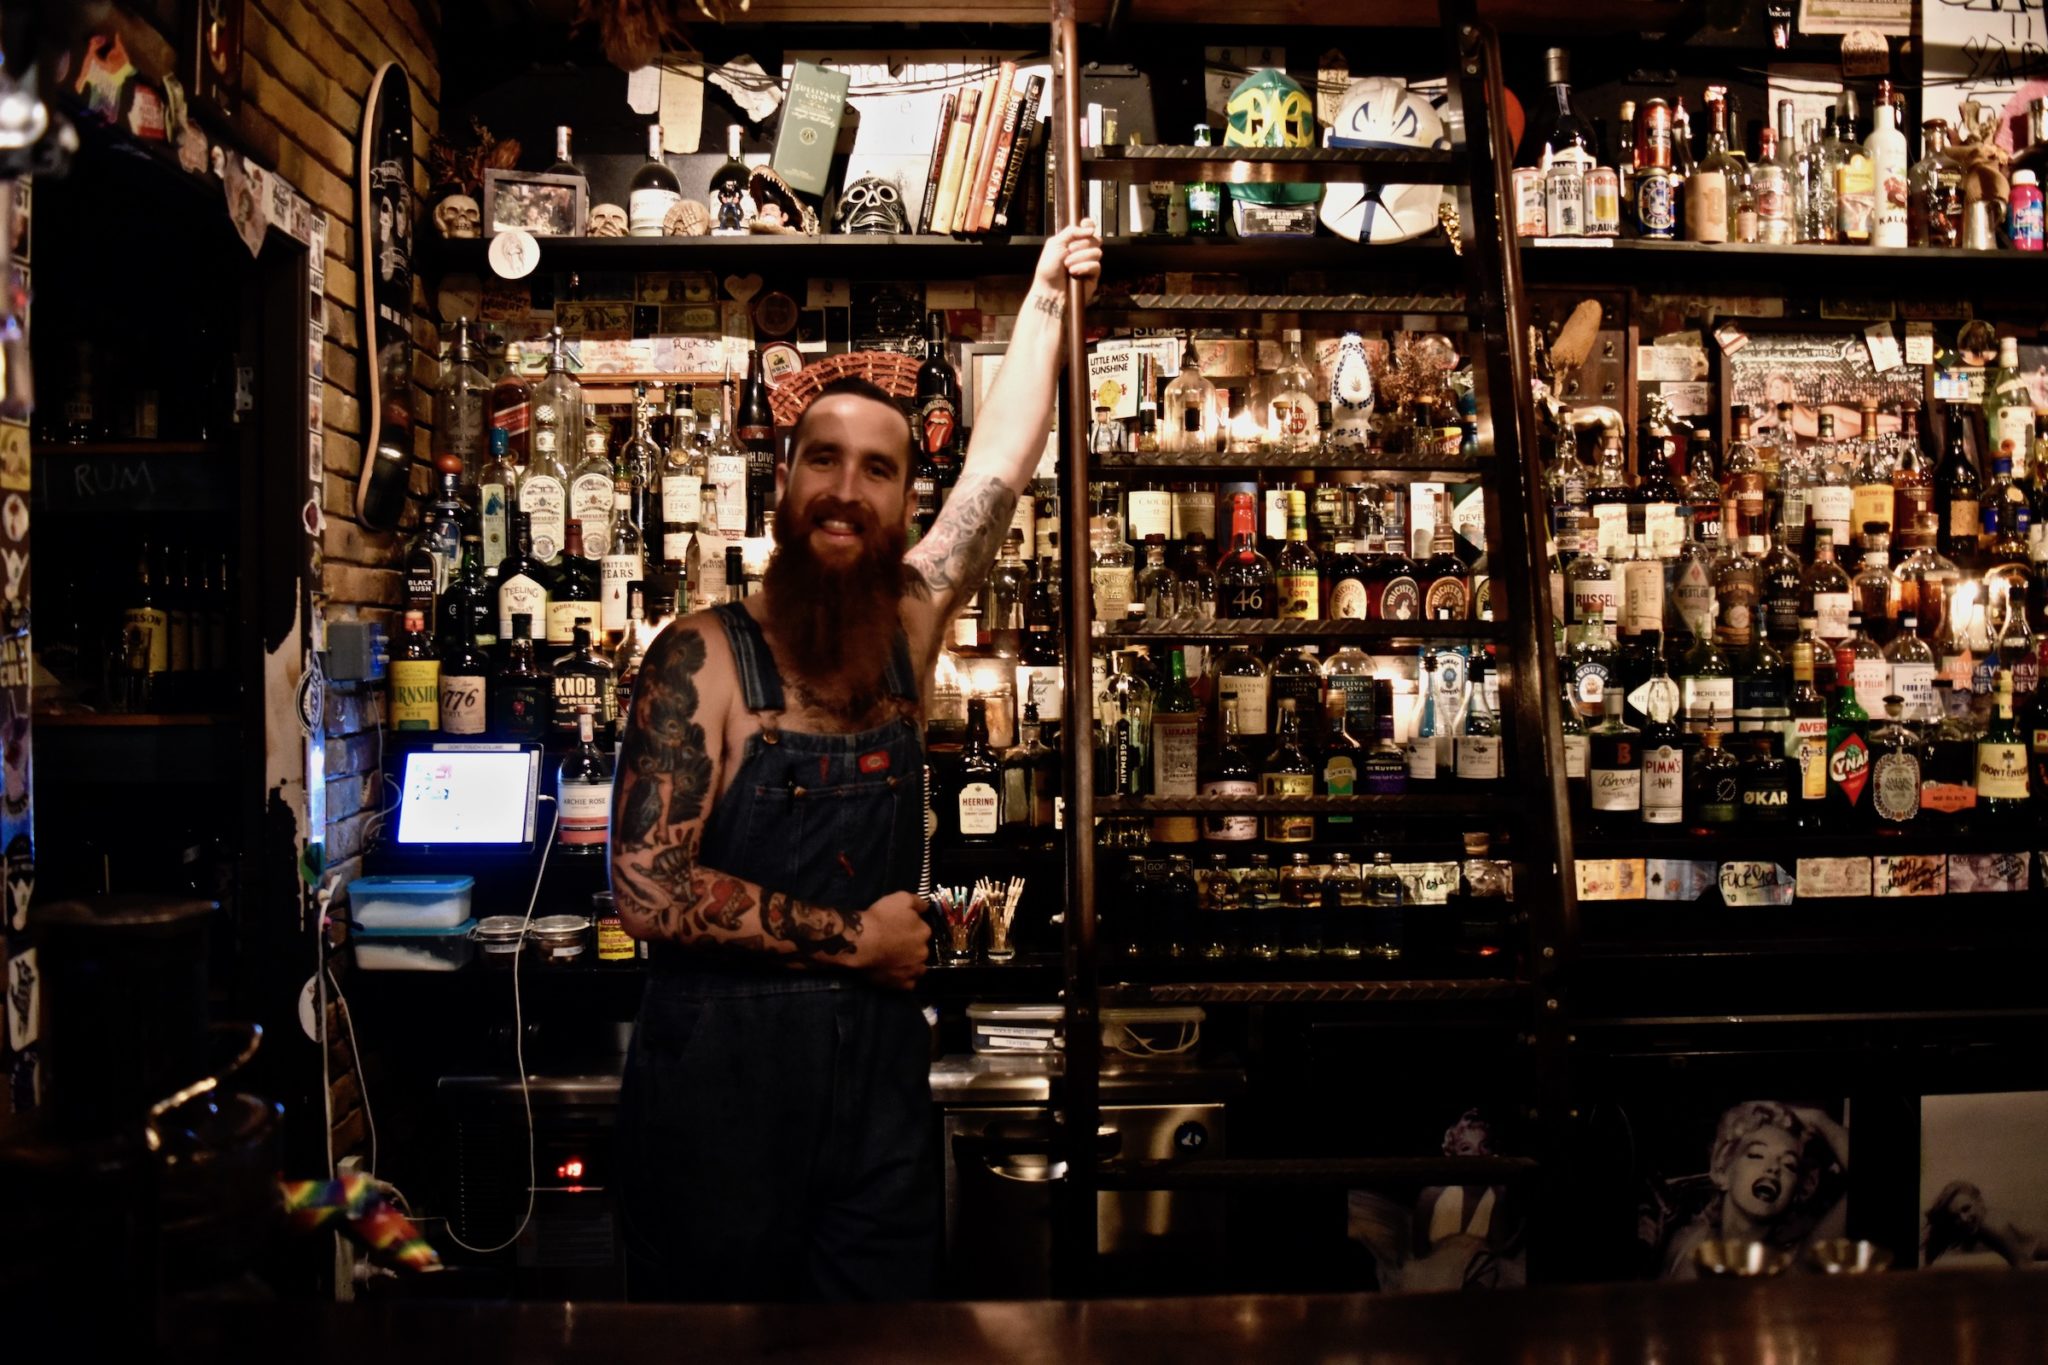 A bearded barman wearing dungarees 